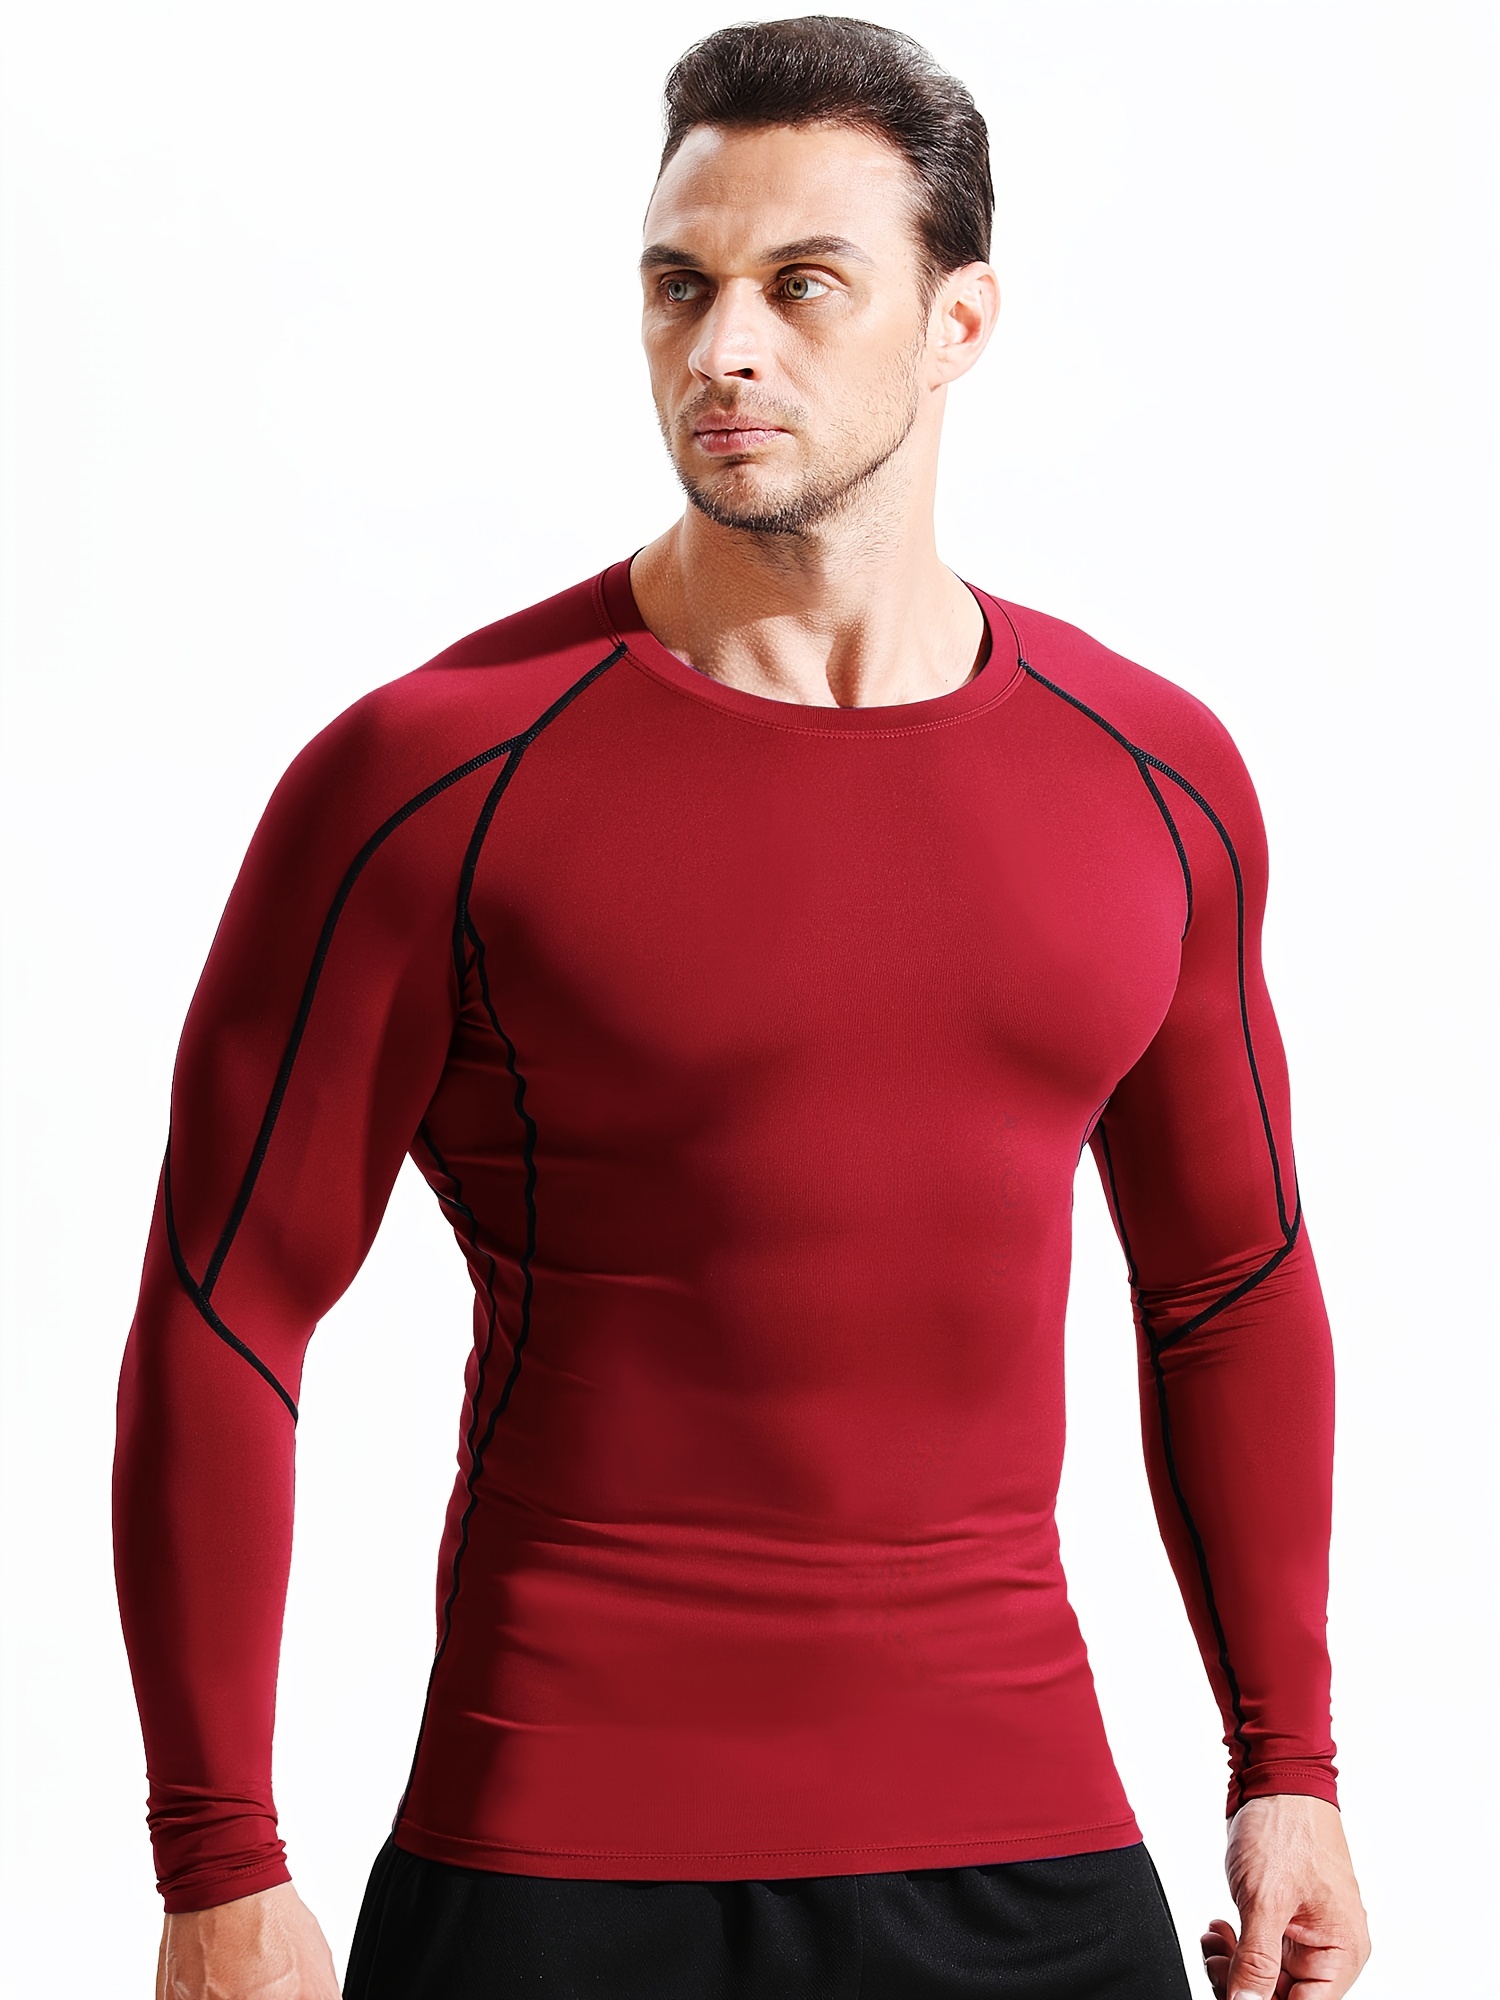 Compression Shirts Men Long Sleeve Athletic Cold Weather Baselayer  Undershirt Gear Tshirt For Sports Workout Autumn Winter